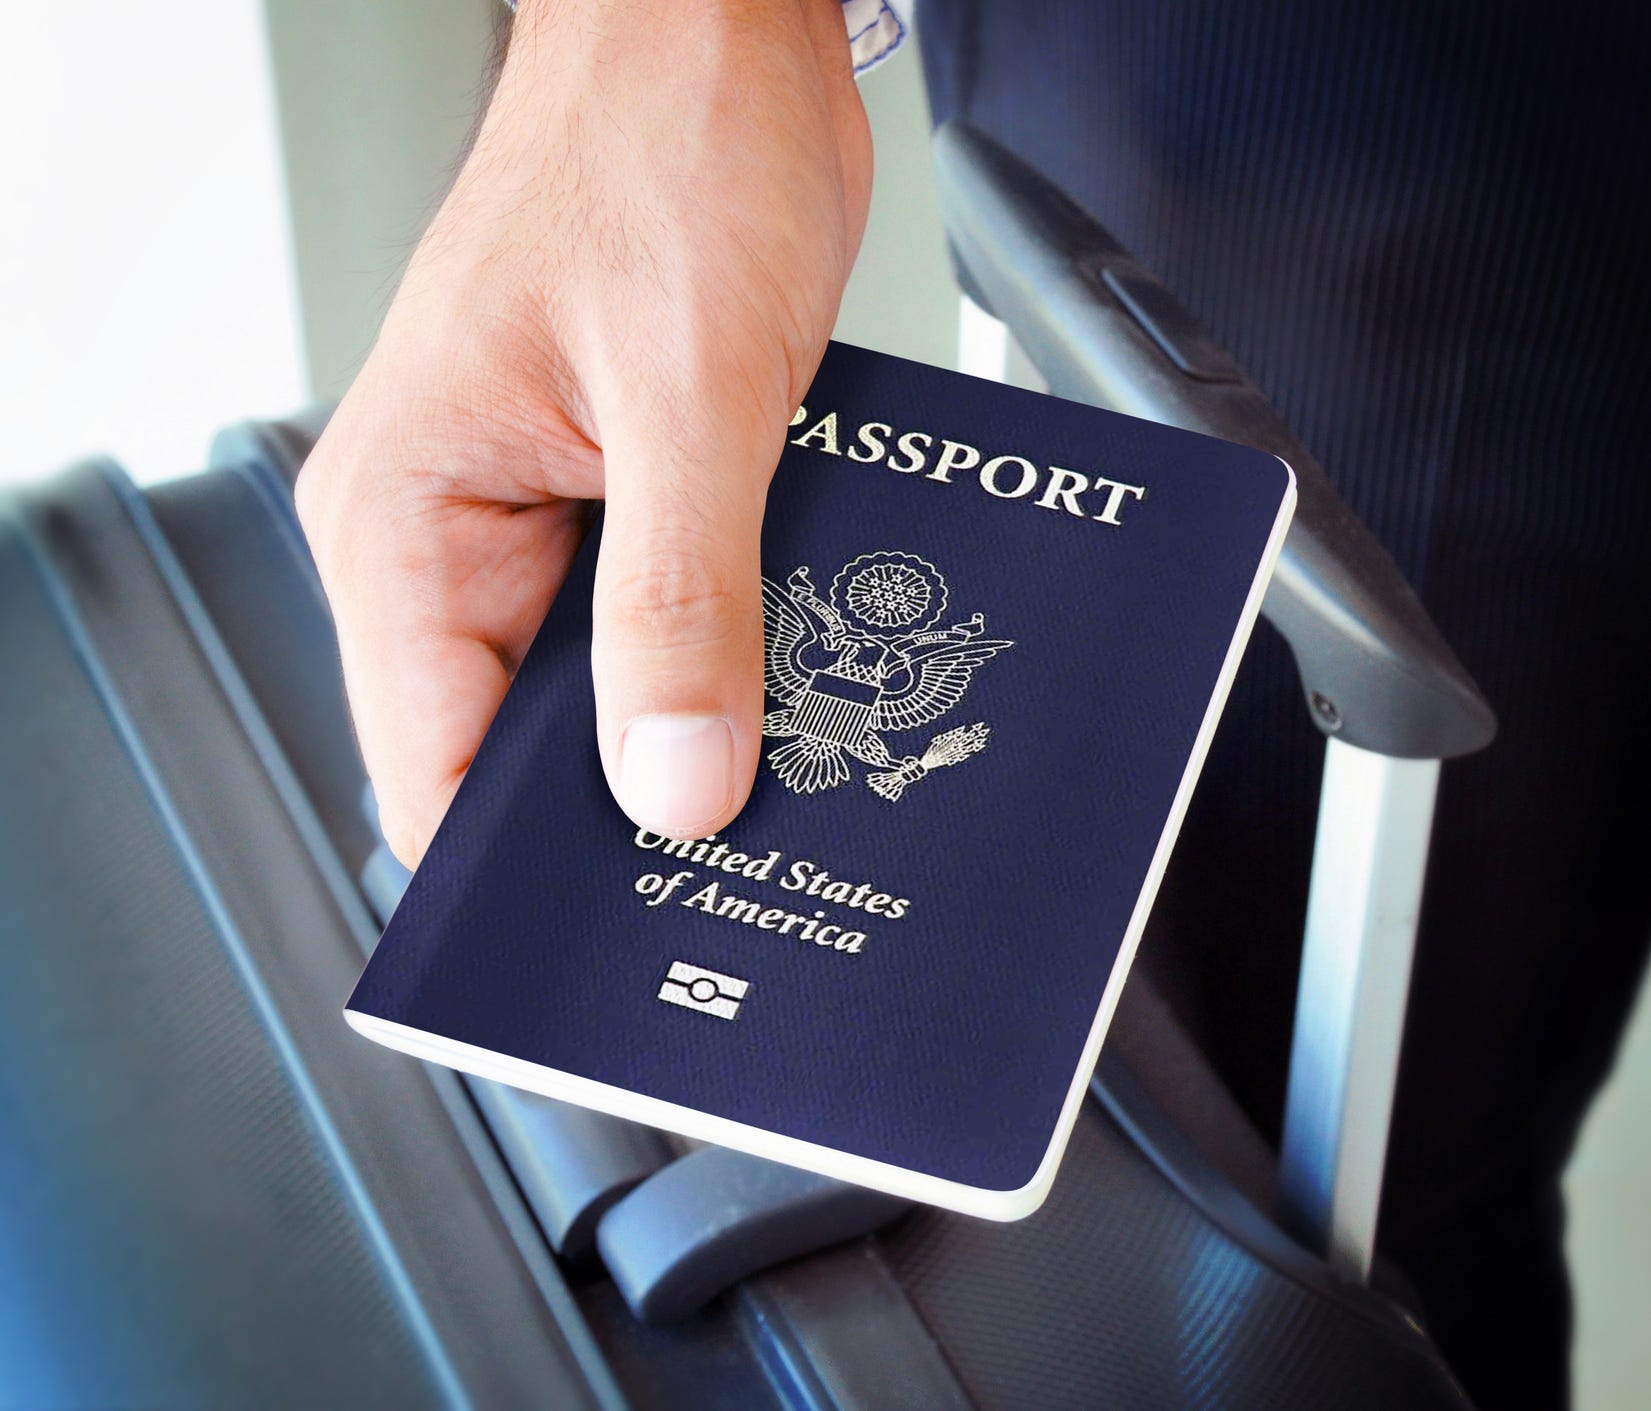 September marks the U.S. Department of State's Passport Awareness Month, since this year is particularly important ahead of some impending changes.